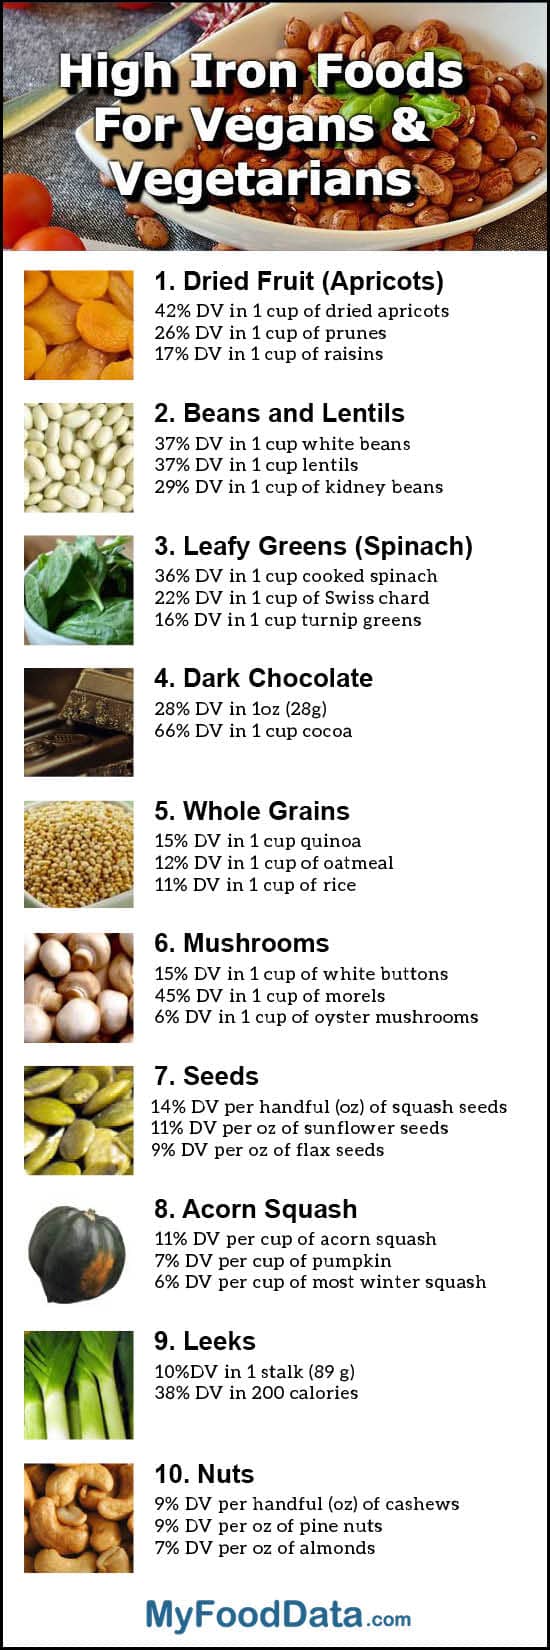 Top 10 High Iron Foods for Vegetarians and Vegans